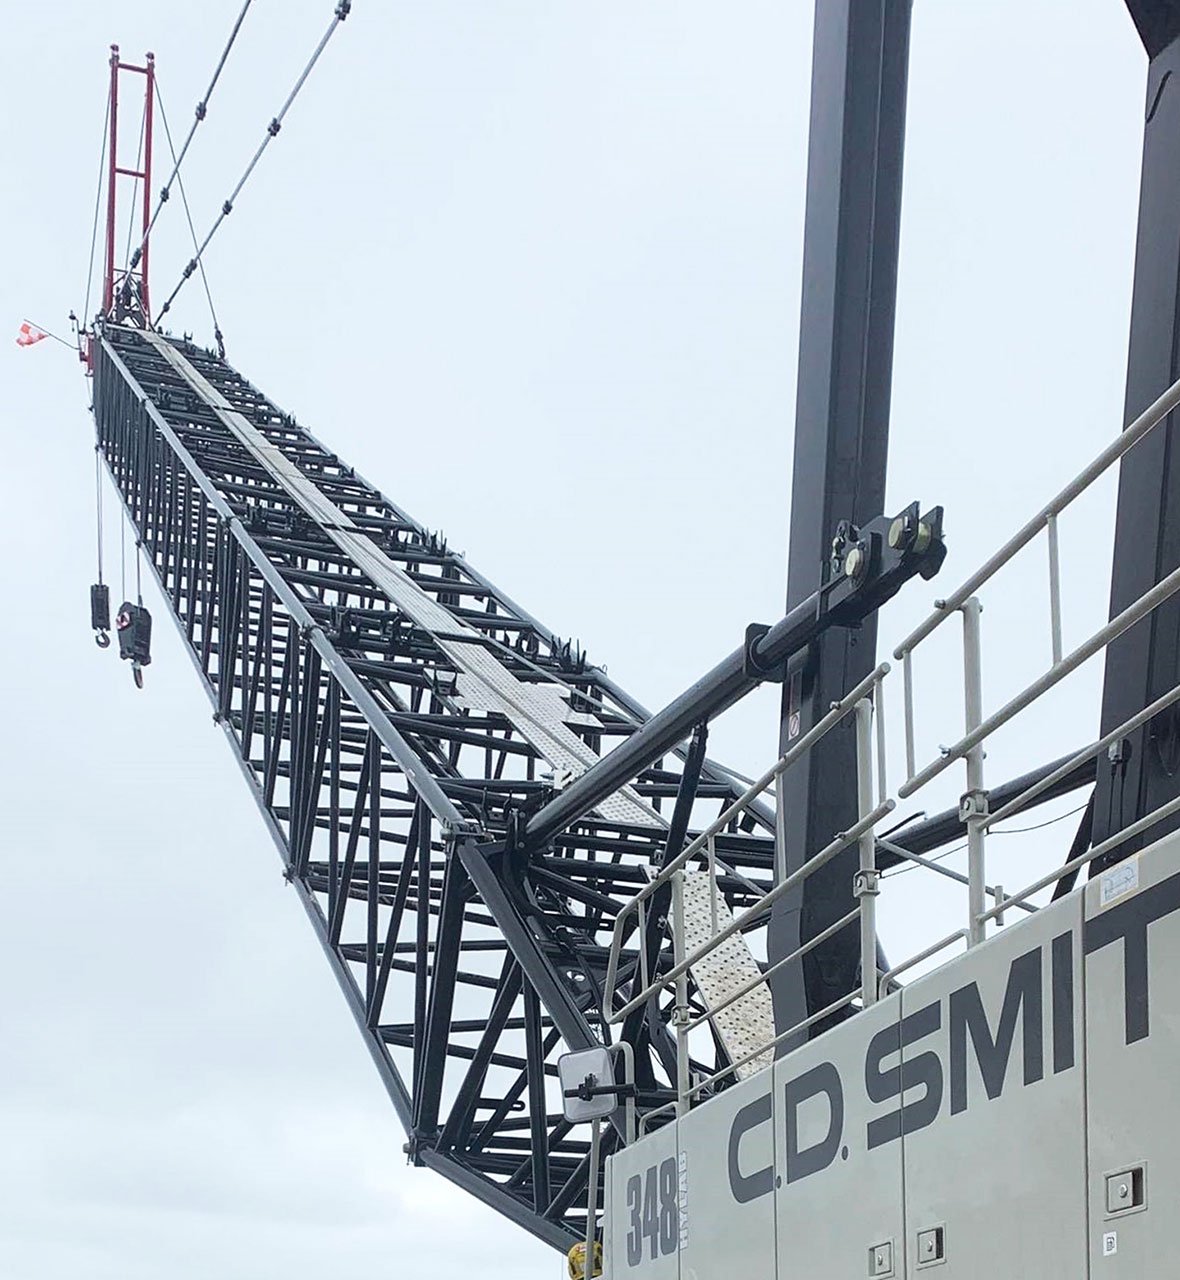 300-ton Lattice Crawler Construction Crane Added to Heavy Equipment Fleet with Full Project Schedule for C.D. Smith Operators